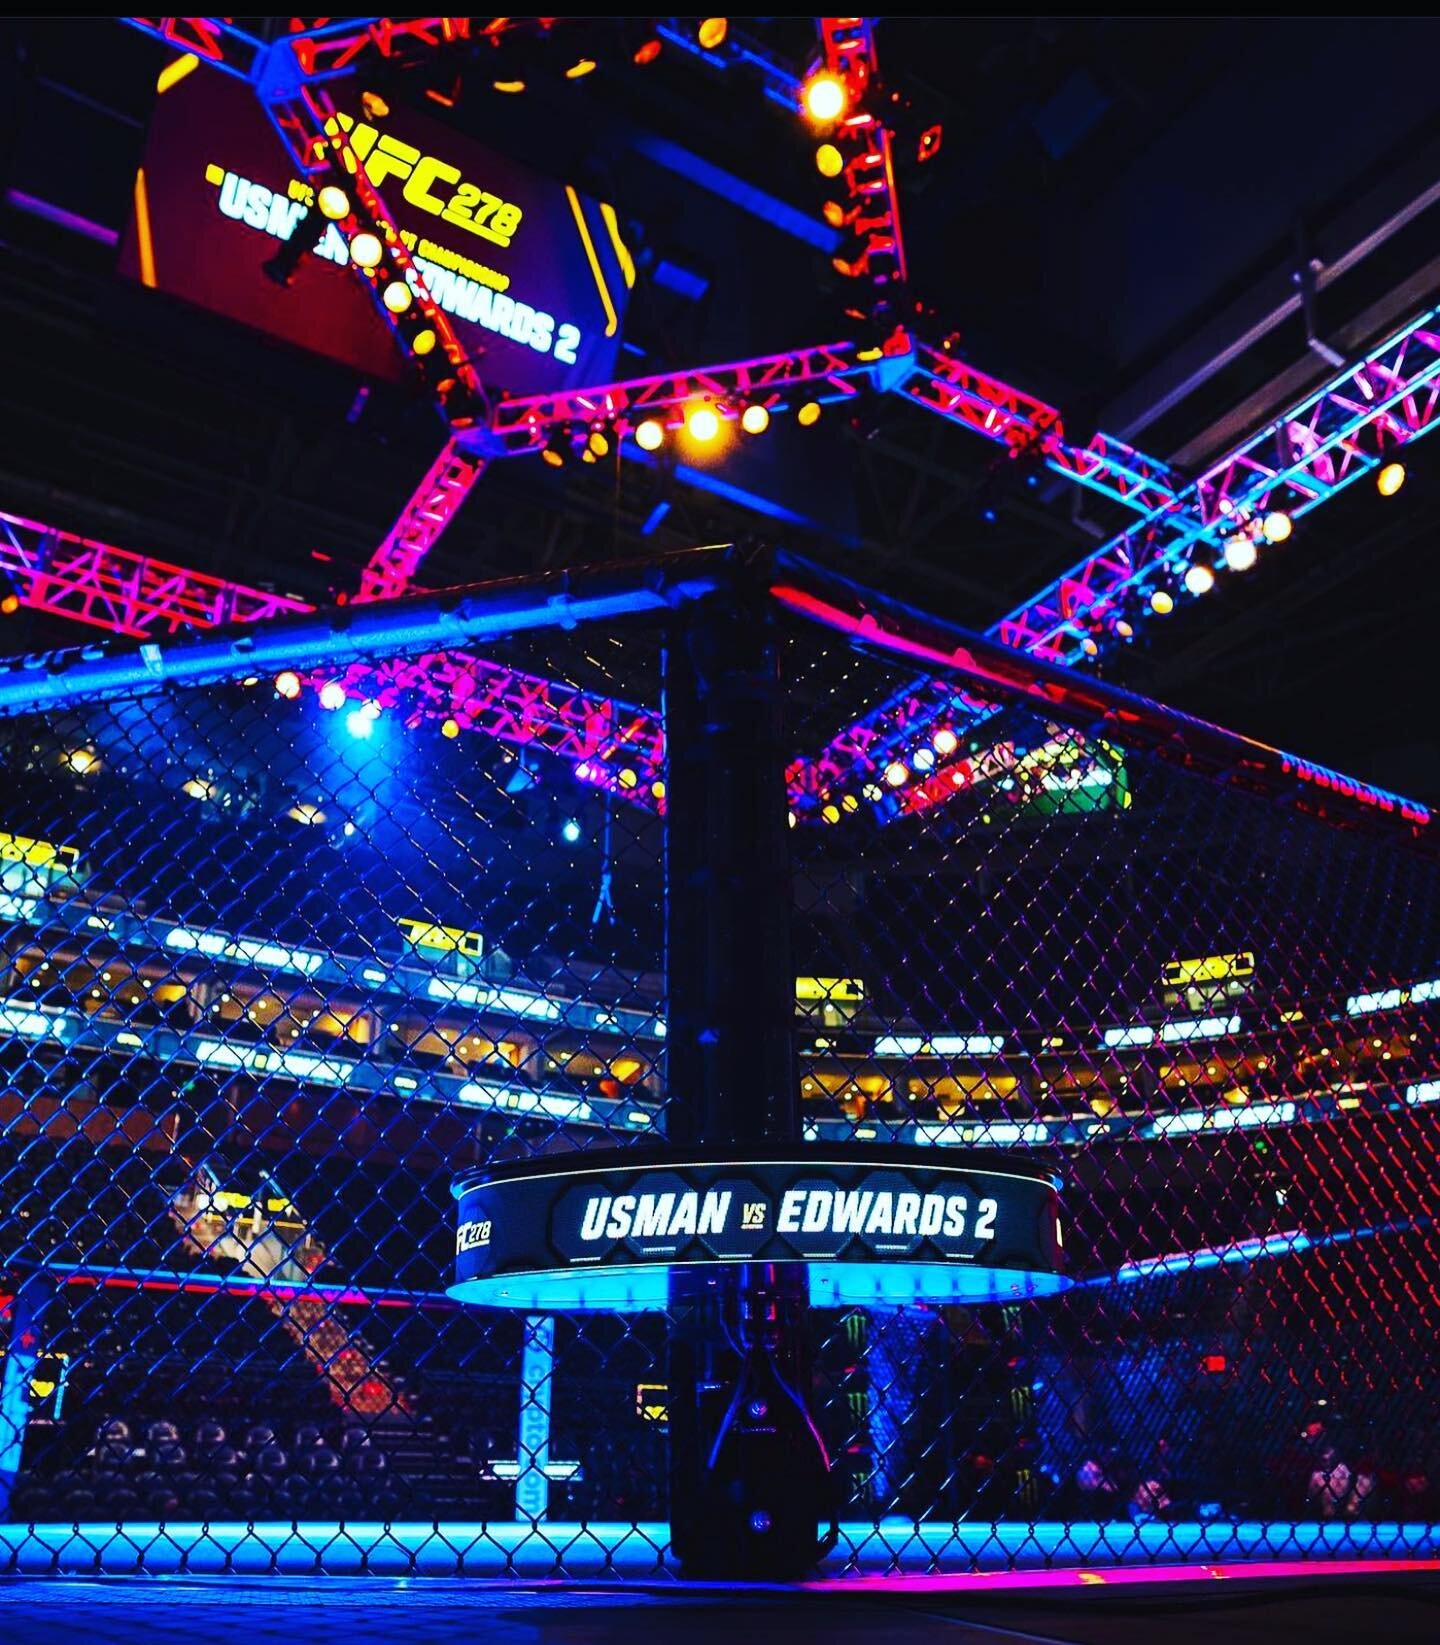 We are LIVE in SLC for #UFC278 !!! Looking good out there 🤩! #concominc @ufc 

#thetotalproductioncompany #concom_inc #productioncompany #liveevents #live #broadcast #remoteproduction #fightnight #ufc #arena #lighting #rigging #octagon #ufcfighter #